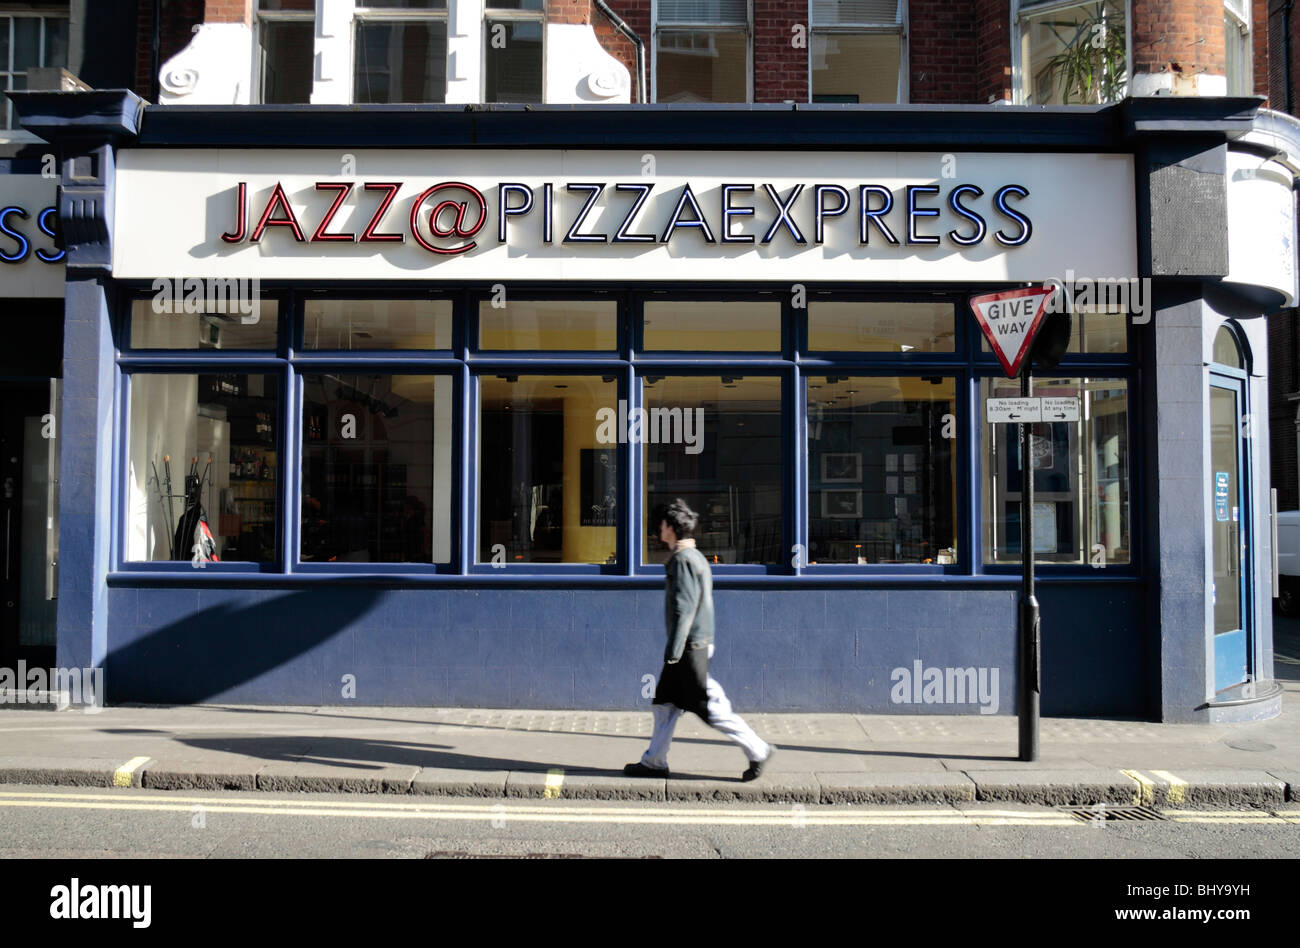 Man walking past the shop front to the Jazz @ Pizza Express restaurant in Dean Street, Soho, London, UK. Nov 2009 Stock Photo